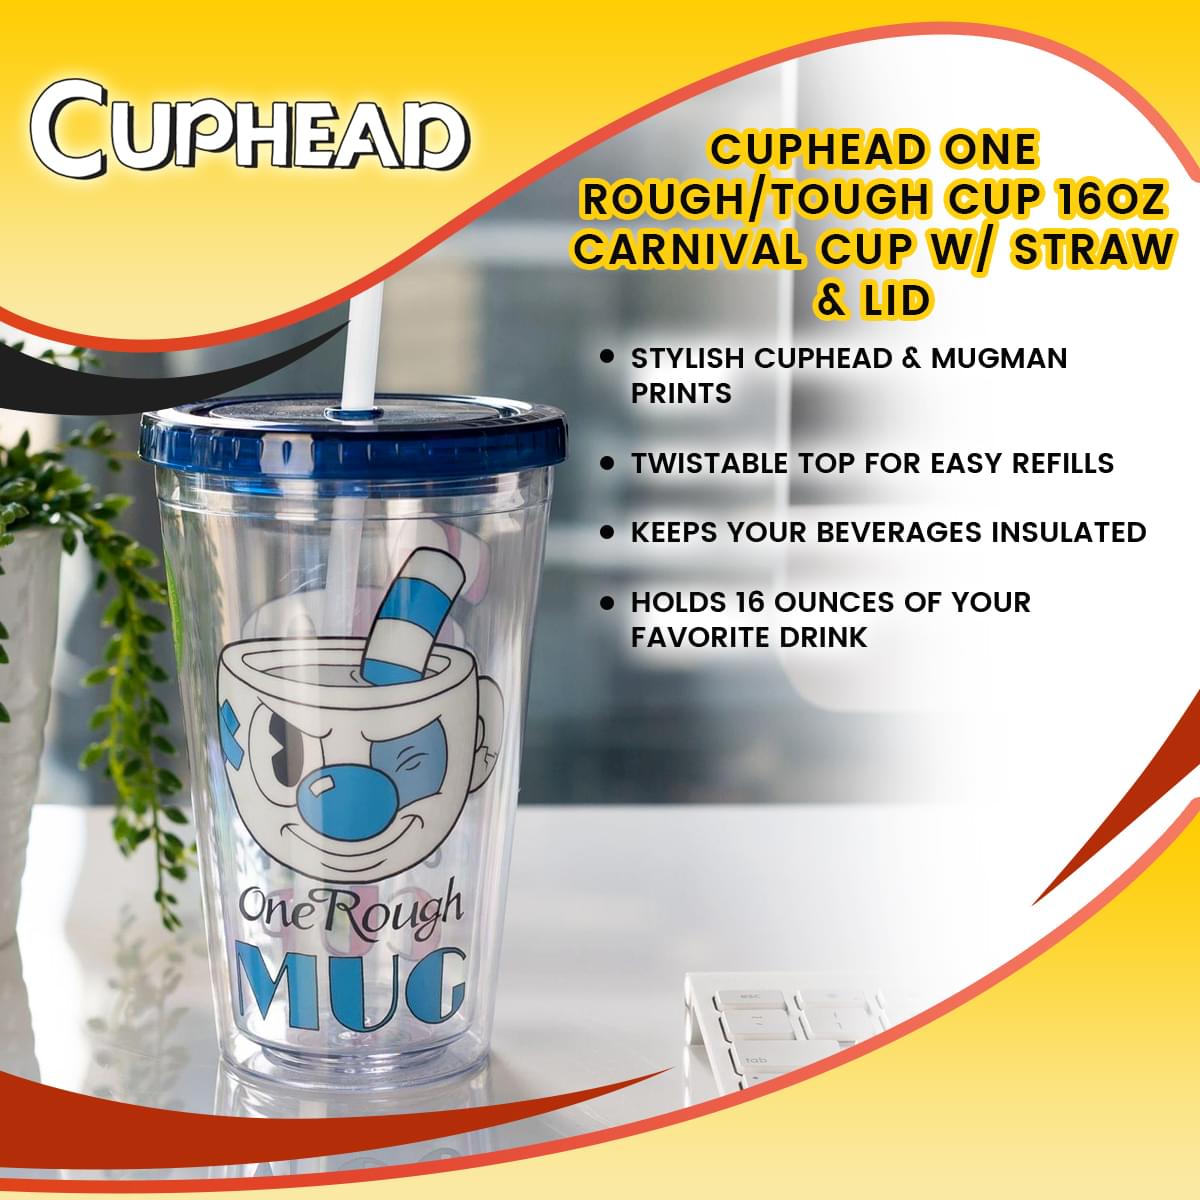 Cuphead One Rough/Tough Cup 16oz Carnival Cup w/ Straw & Lid | Free Sh ...